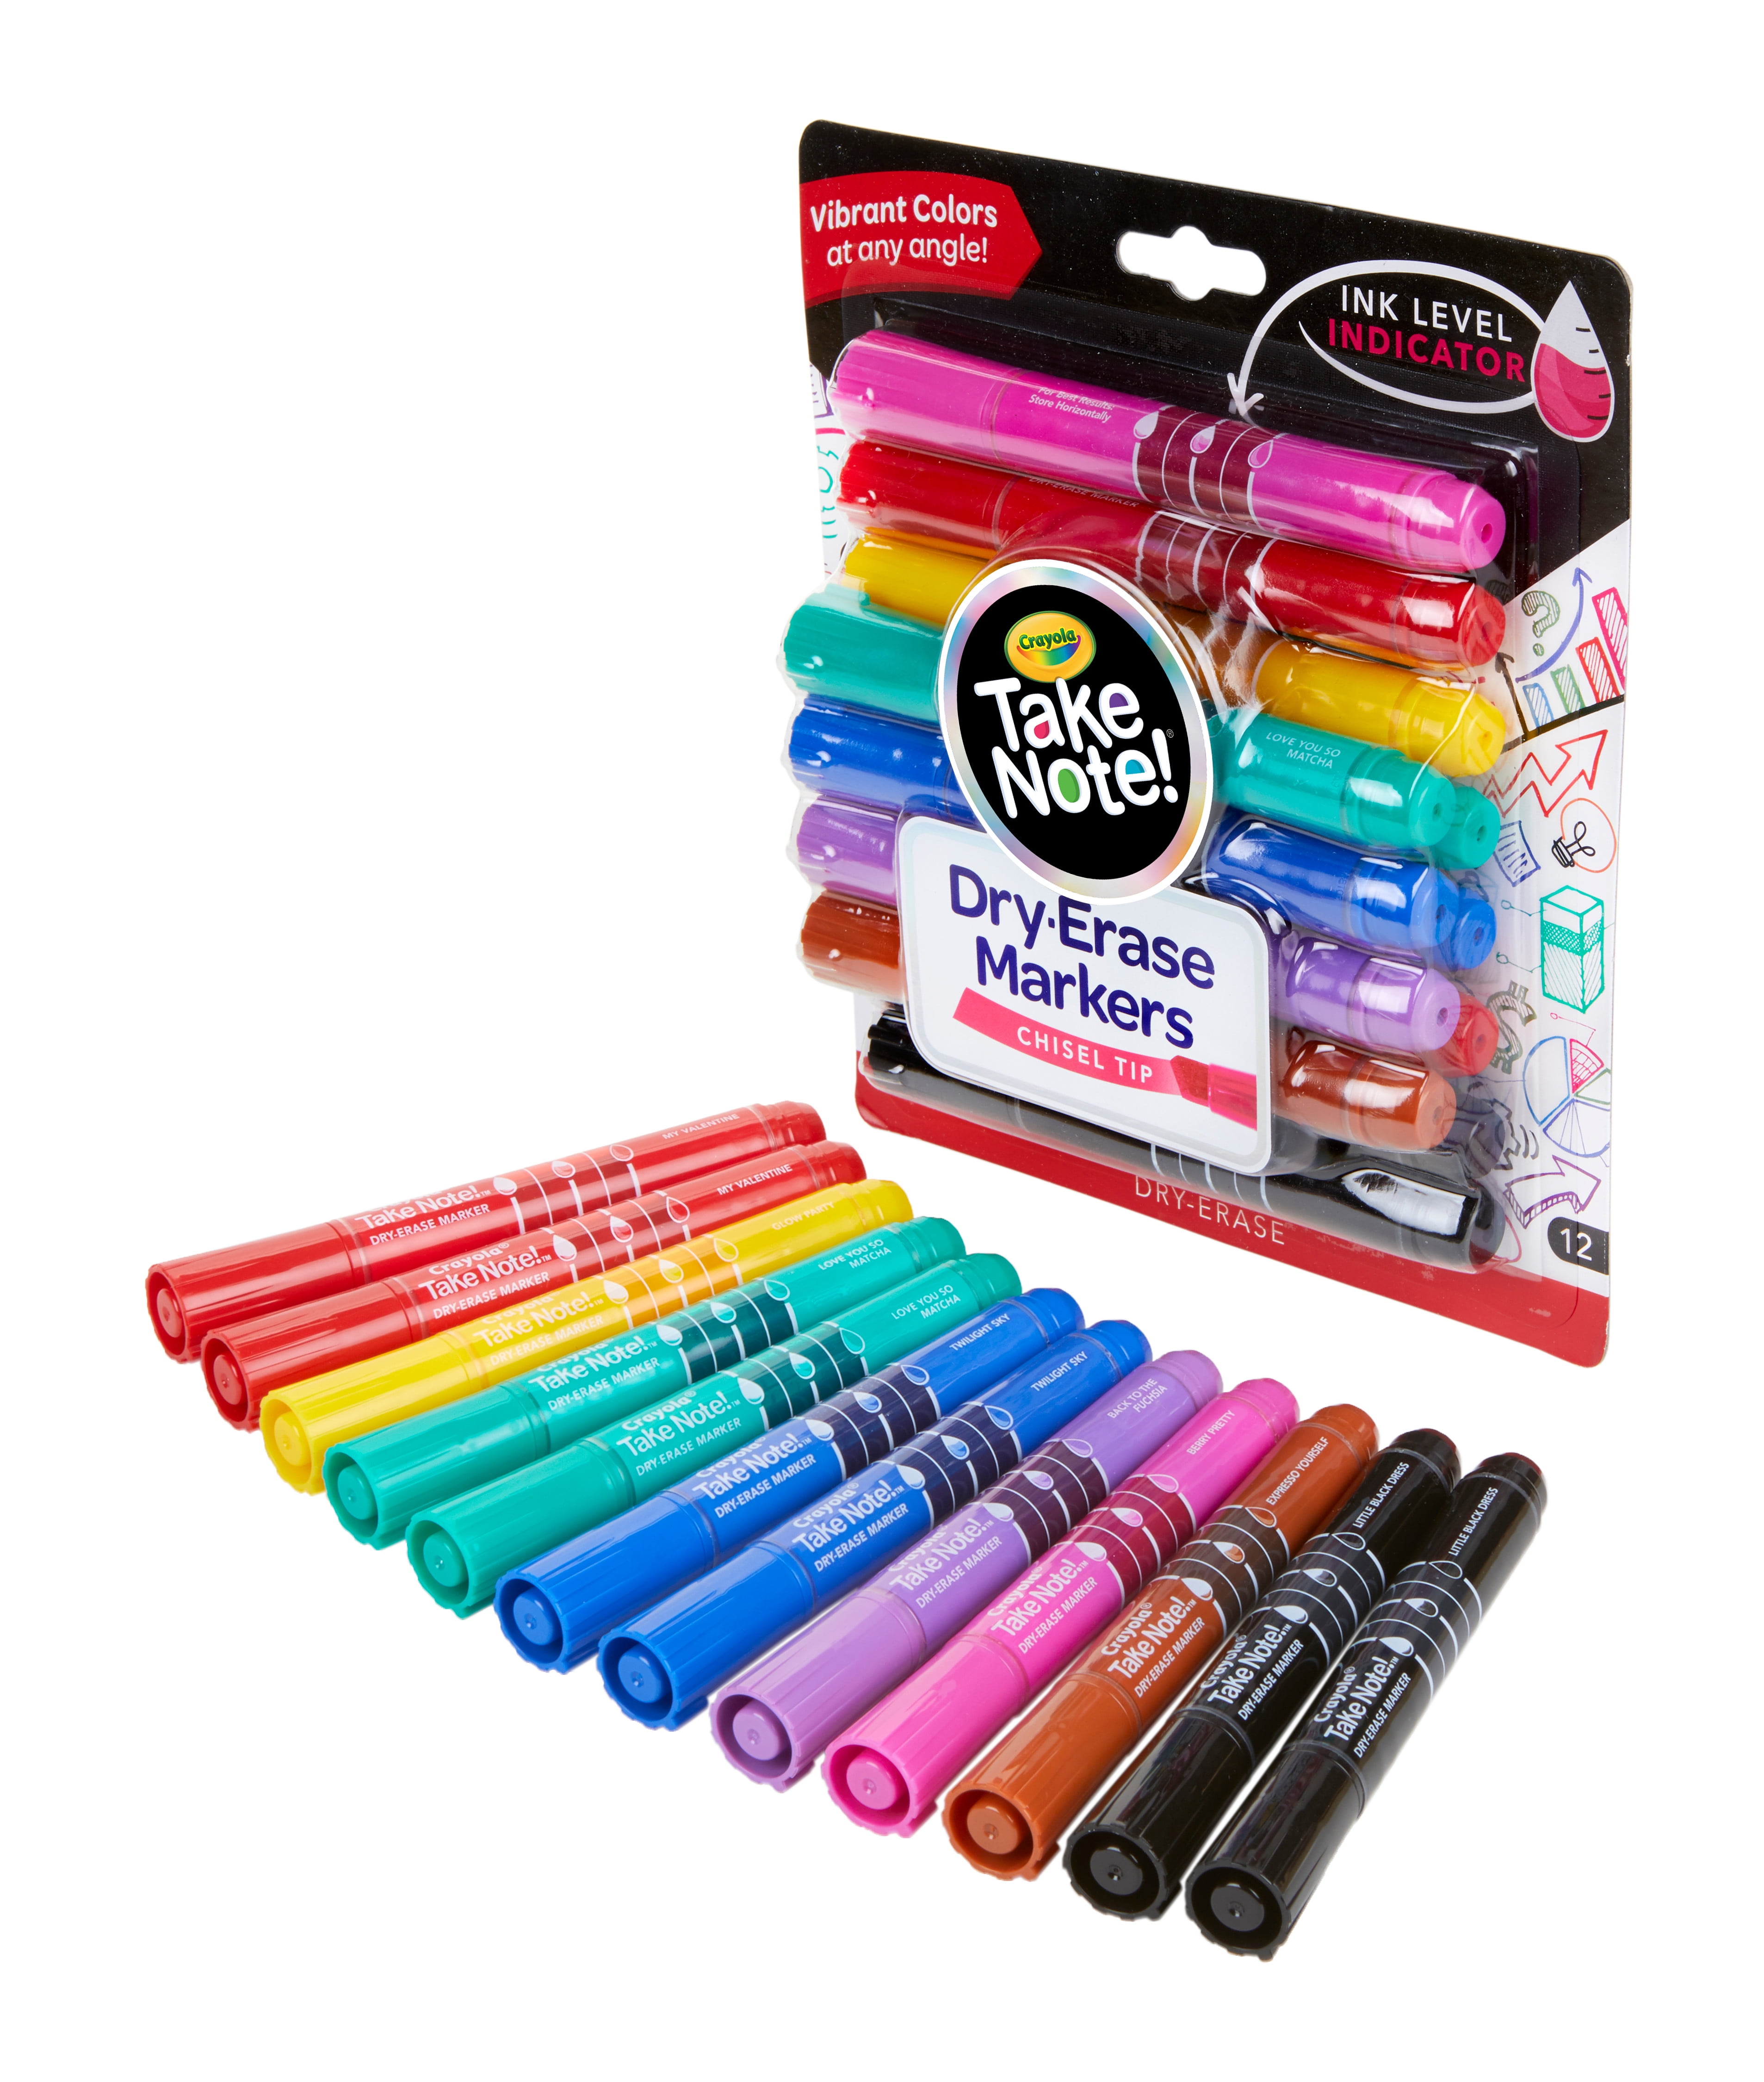 CRAYOLA Dry-Erase Markers 4 MARKERS (regular tip) by Binney & Smith #98-8626